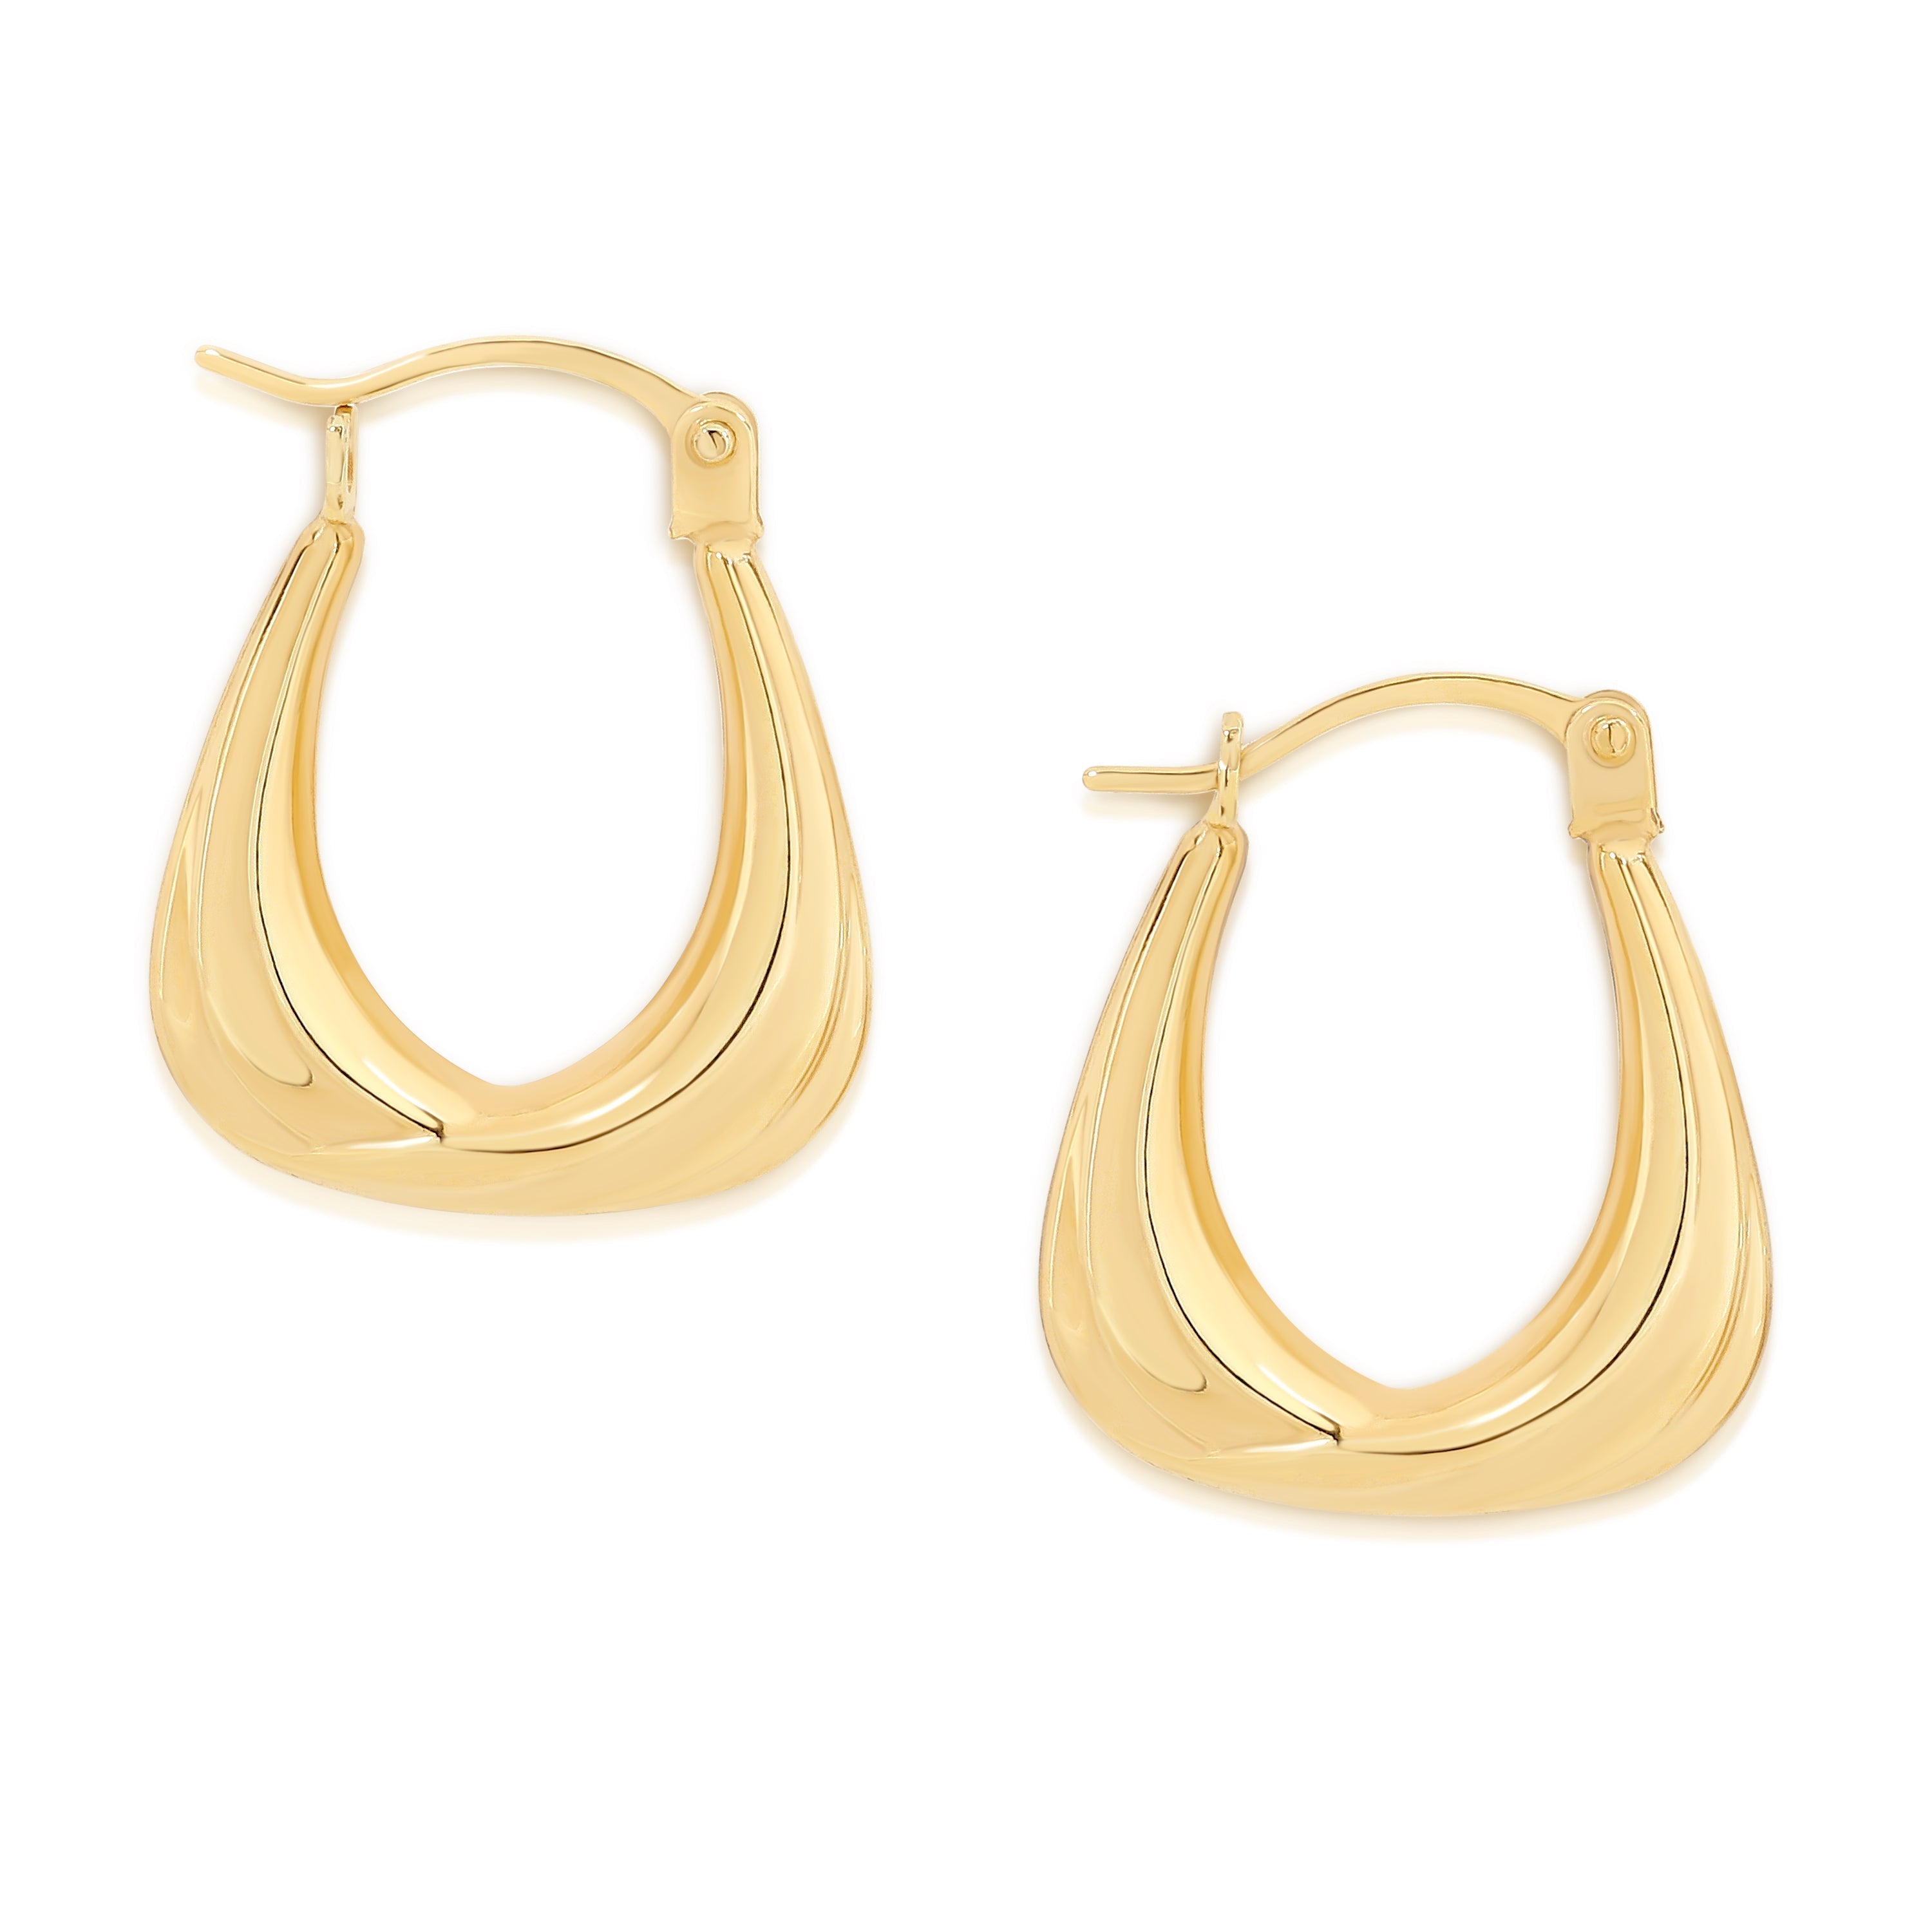 9ct gold hand bag hoops 8mm